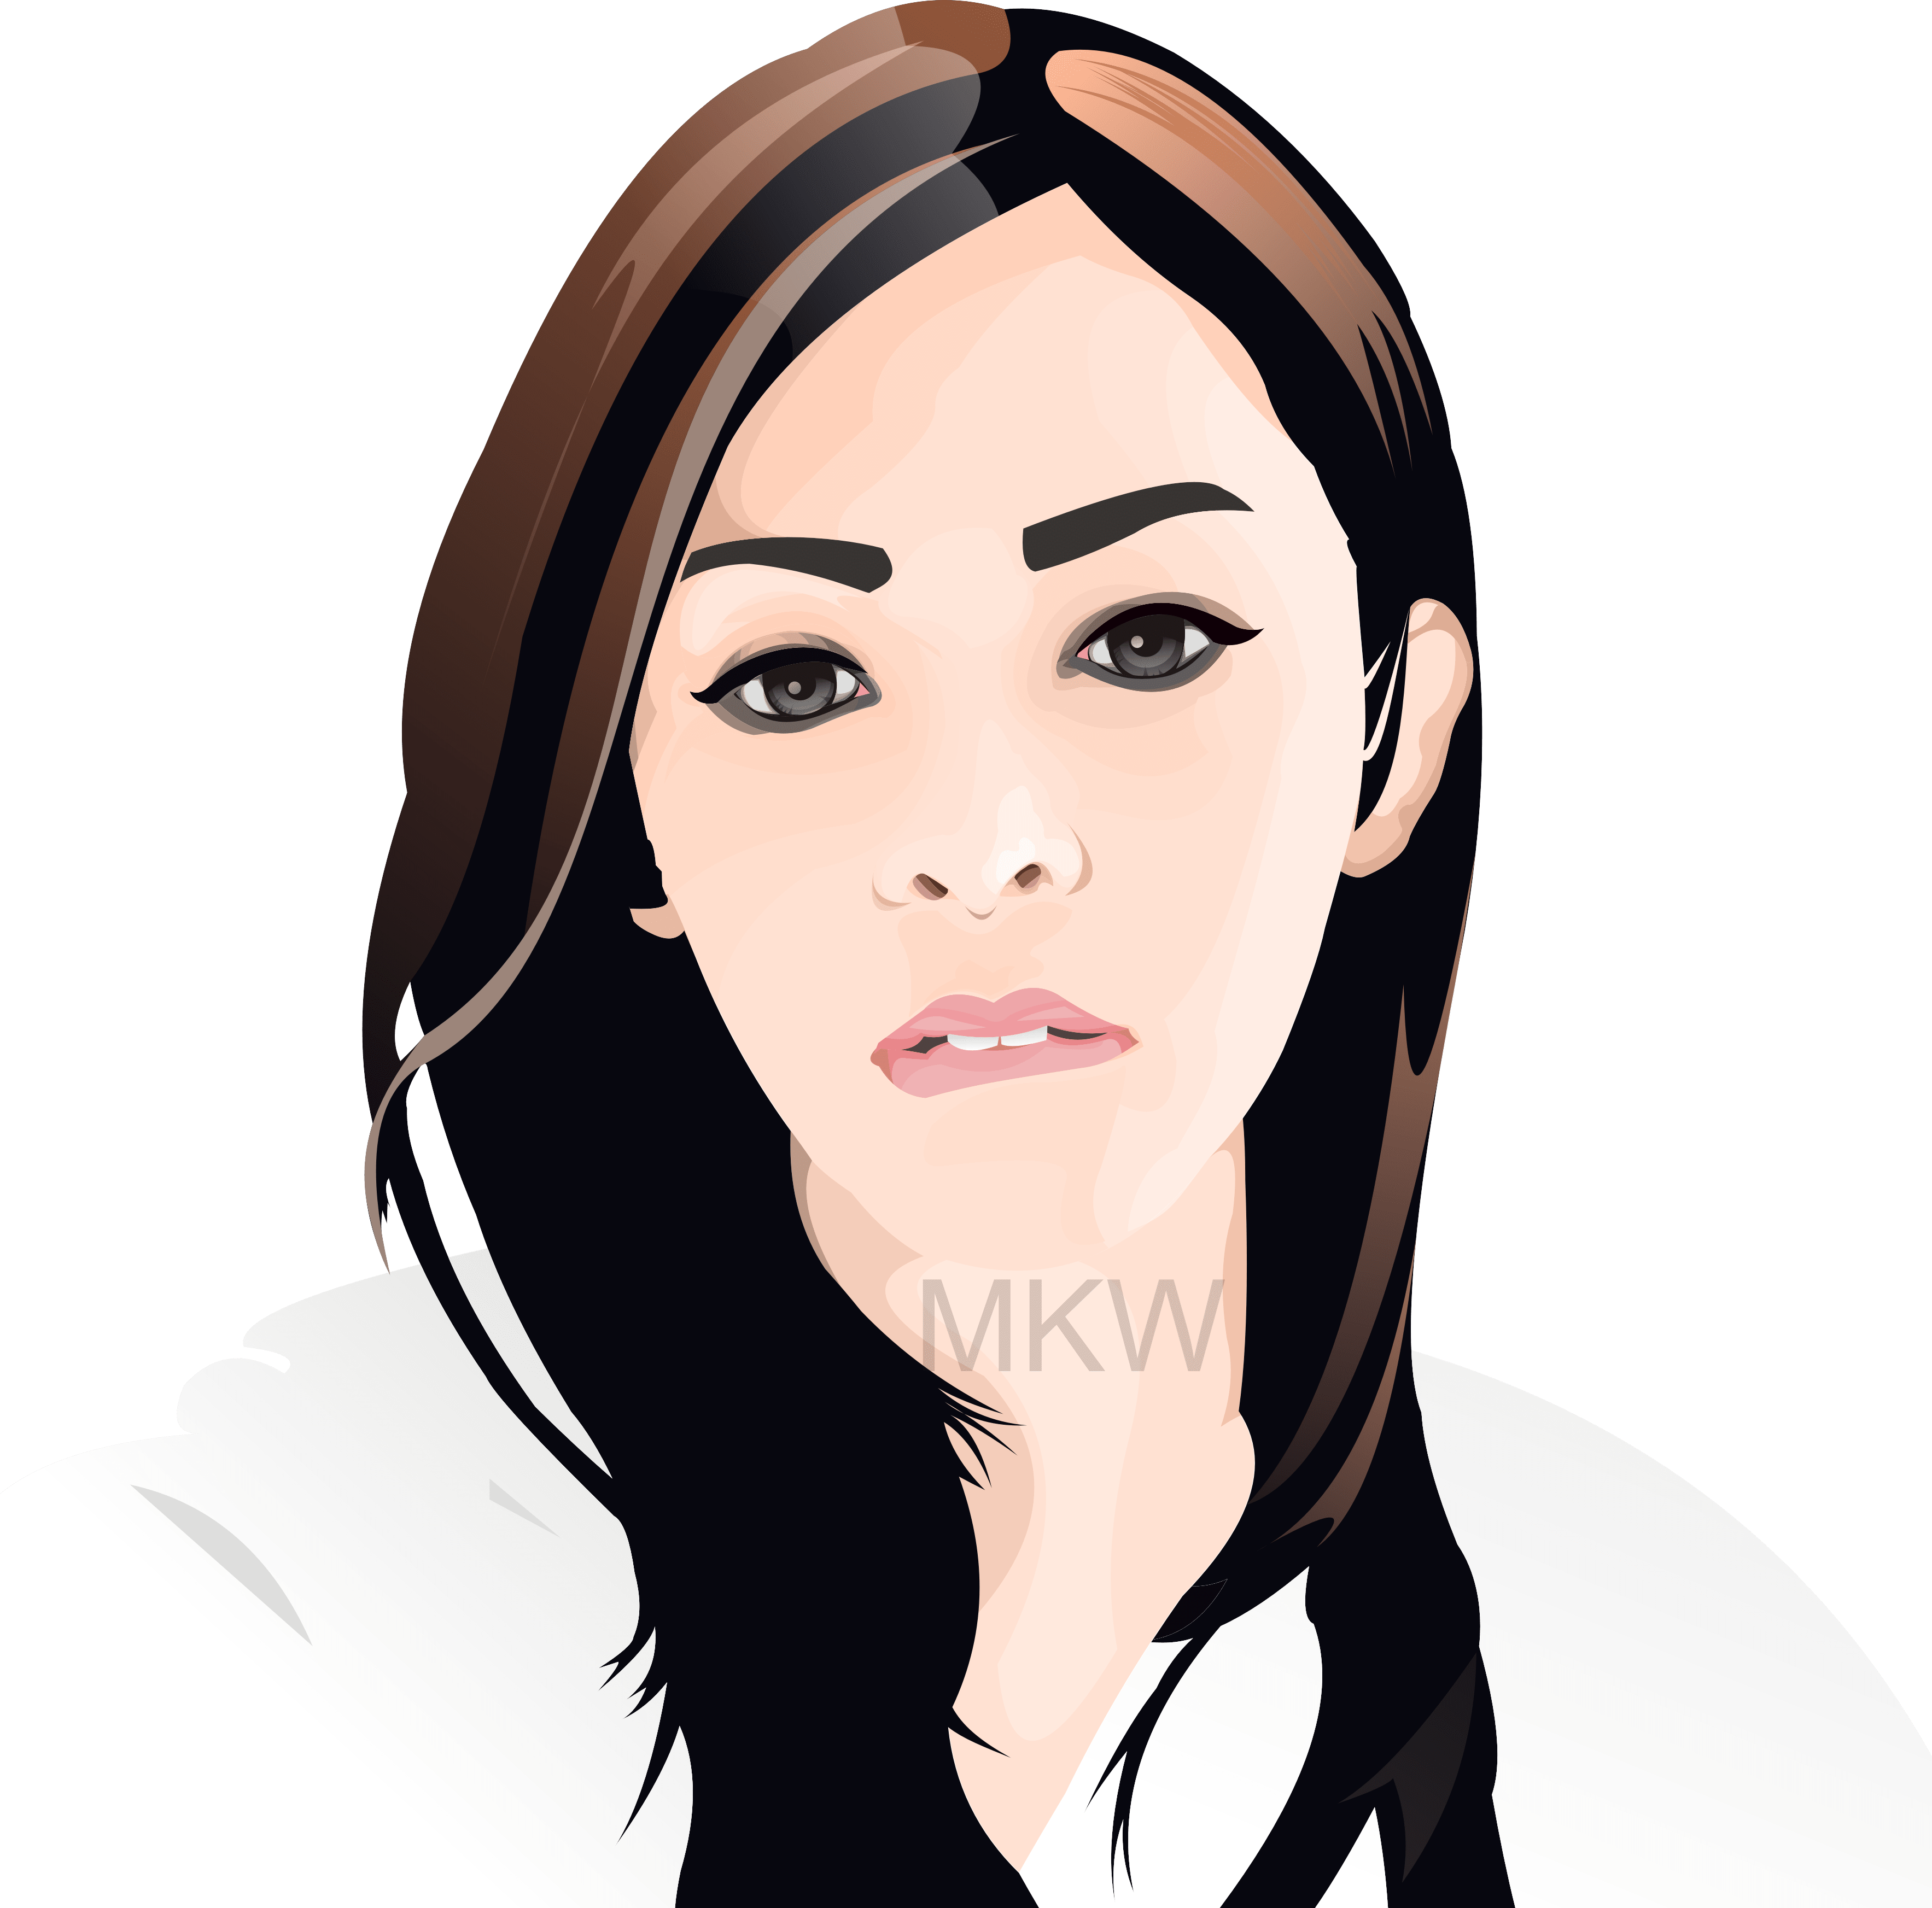 Change your face photo into cartoon or photo vector by Mariakrisw | Fiverr